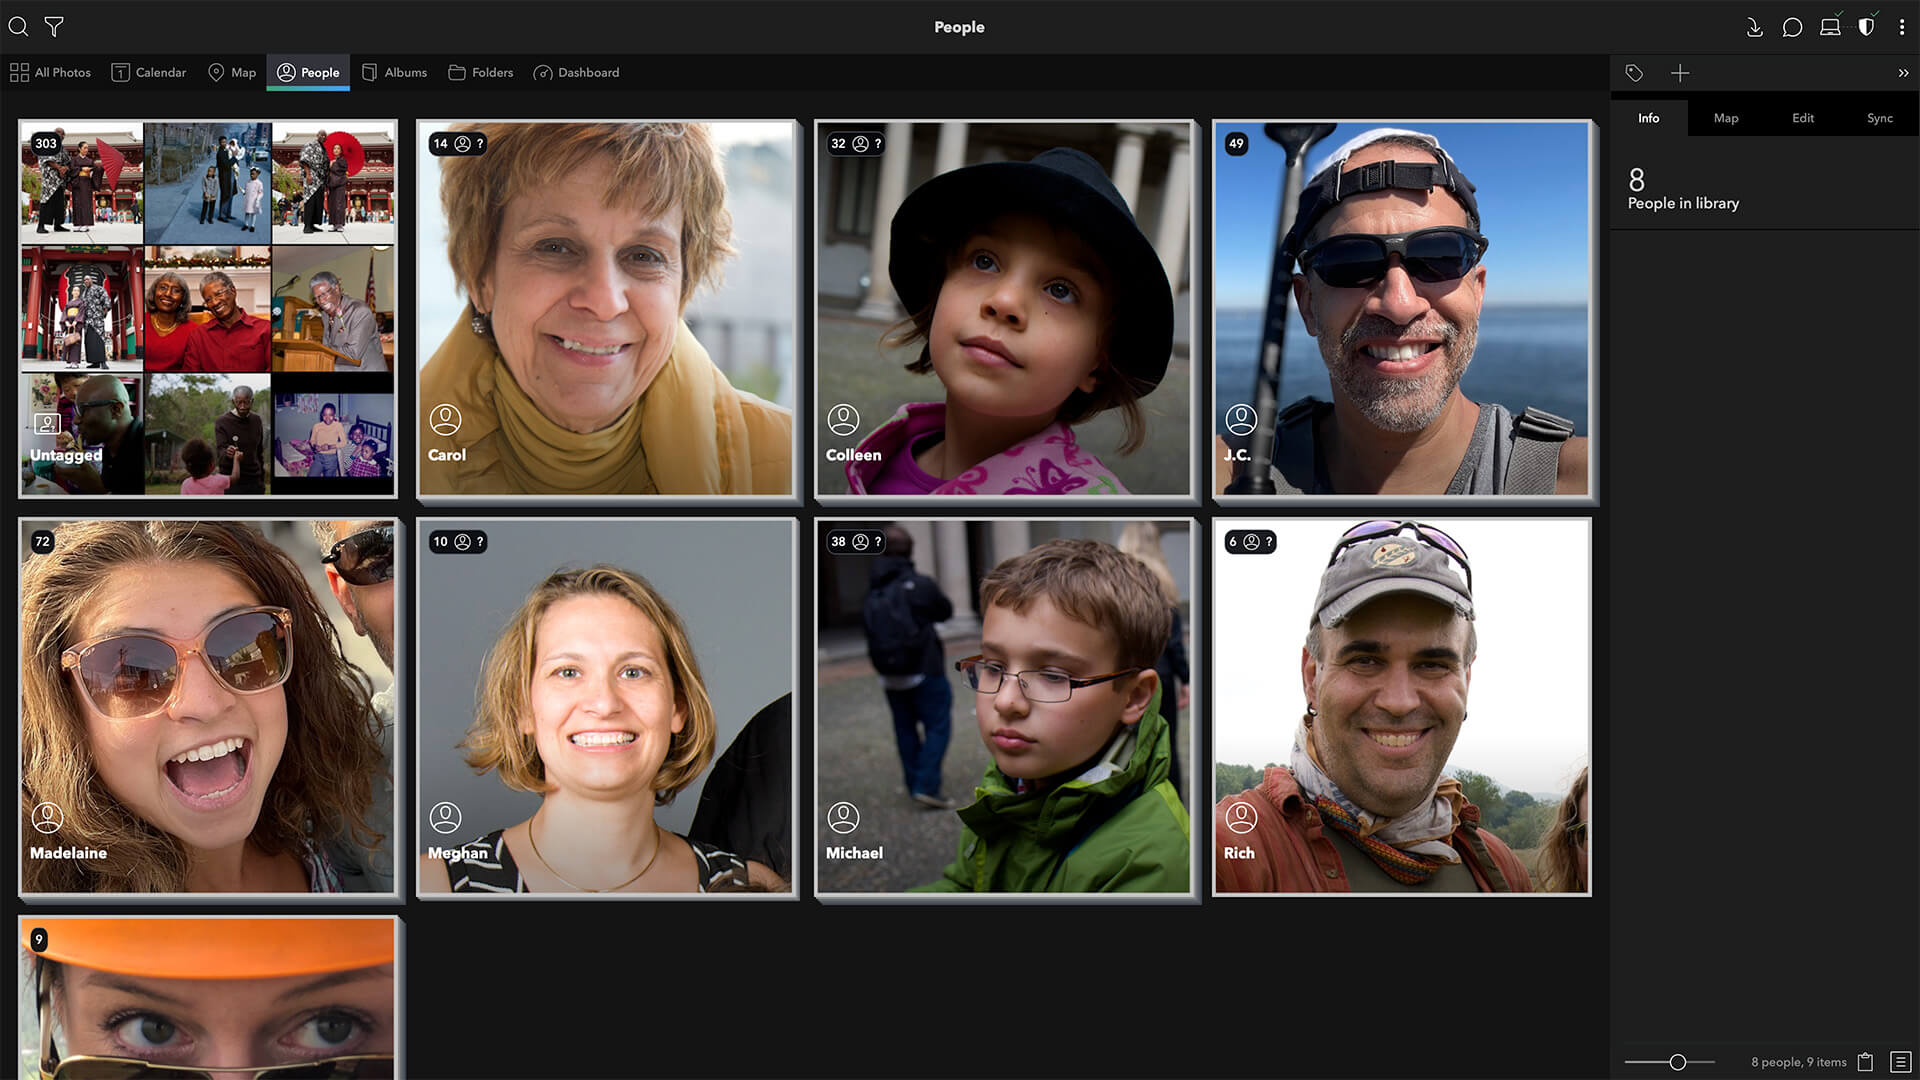 Mylio Photos' powerful face detection allows you to discover your photos based on the people in them.